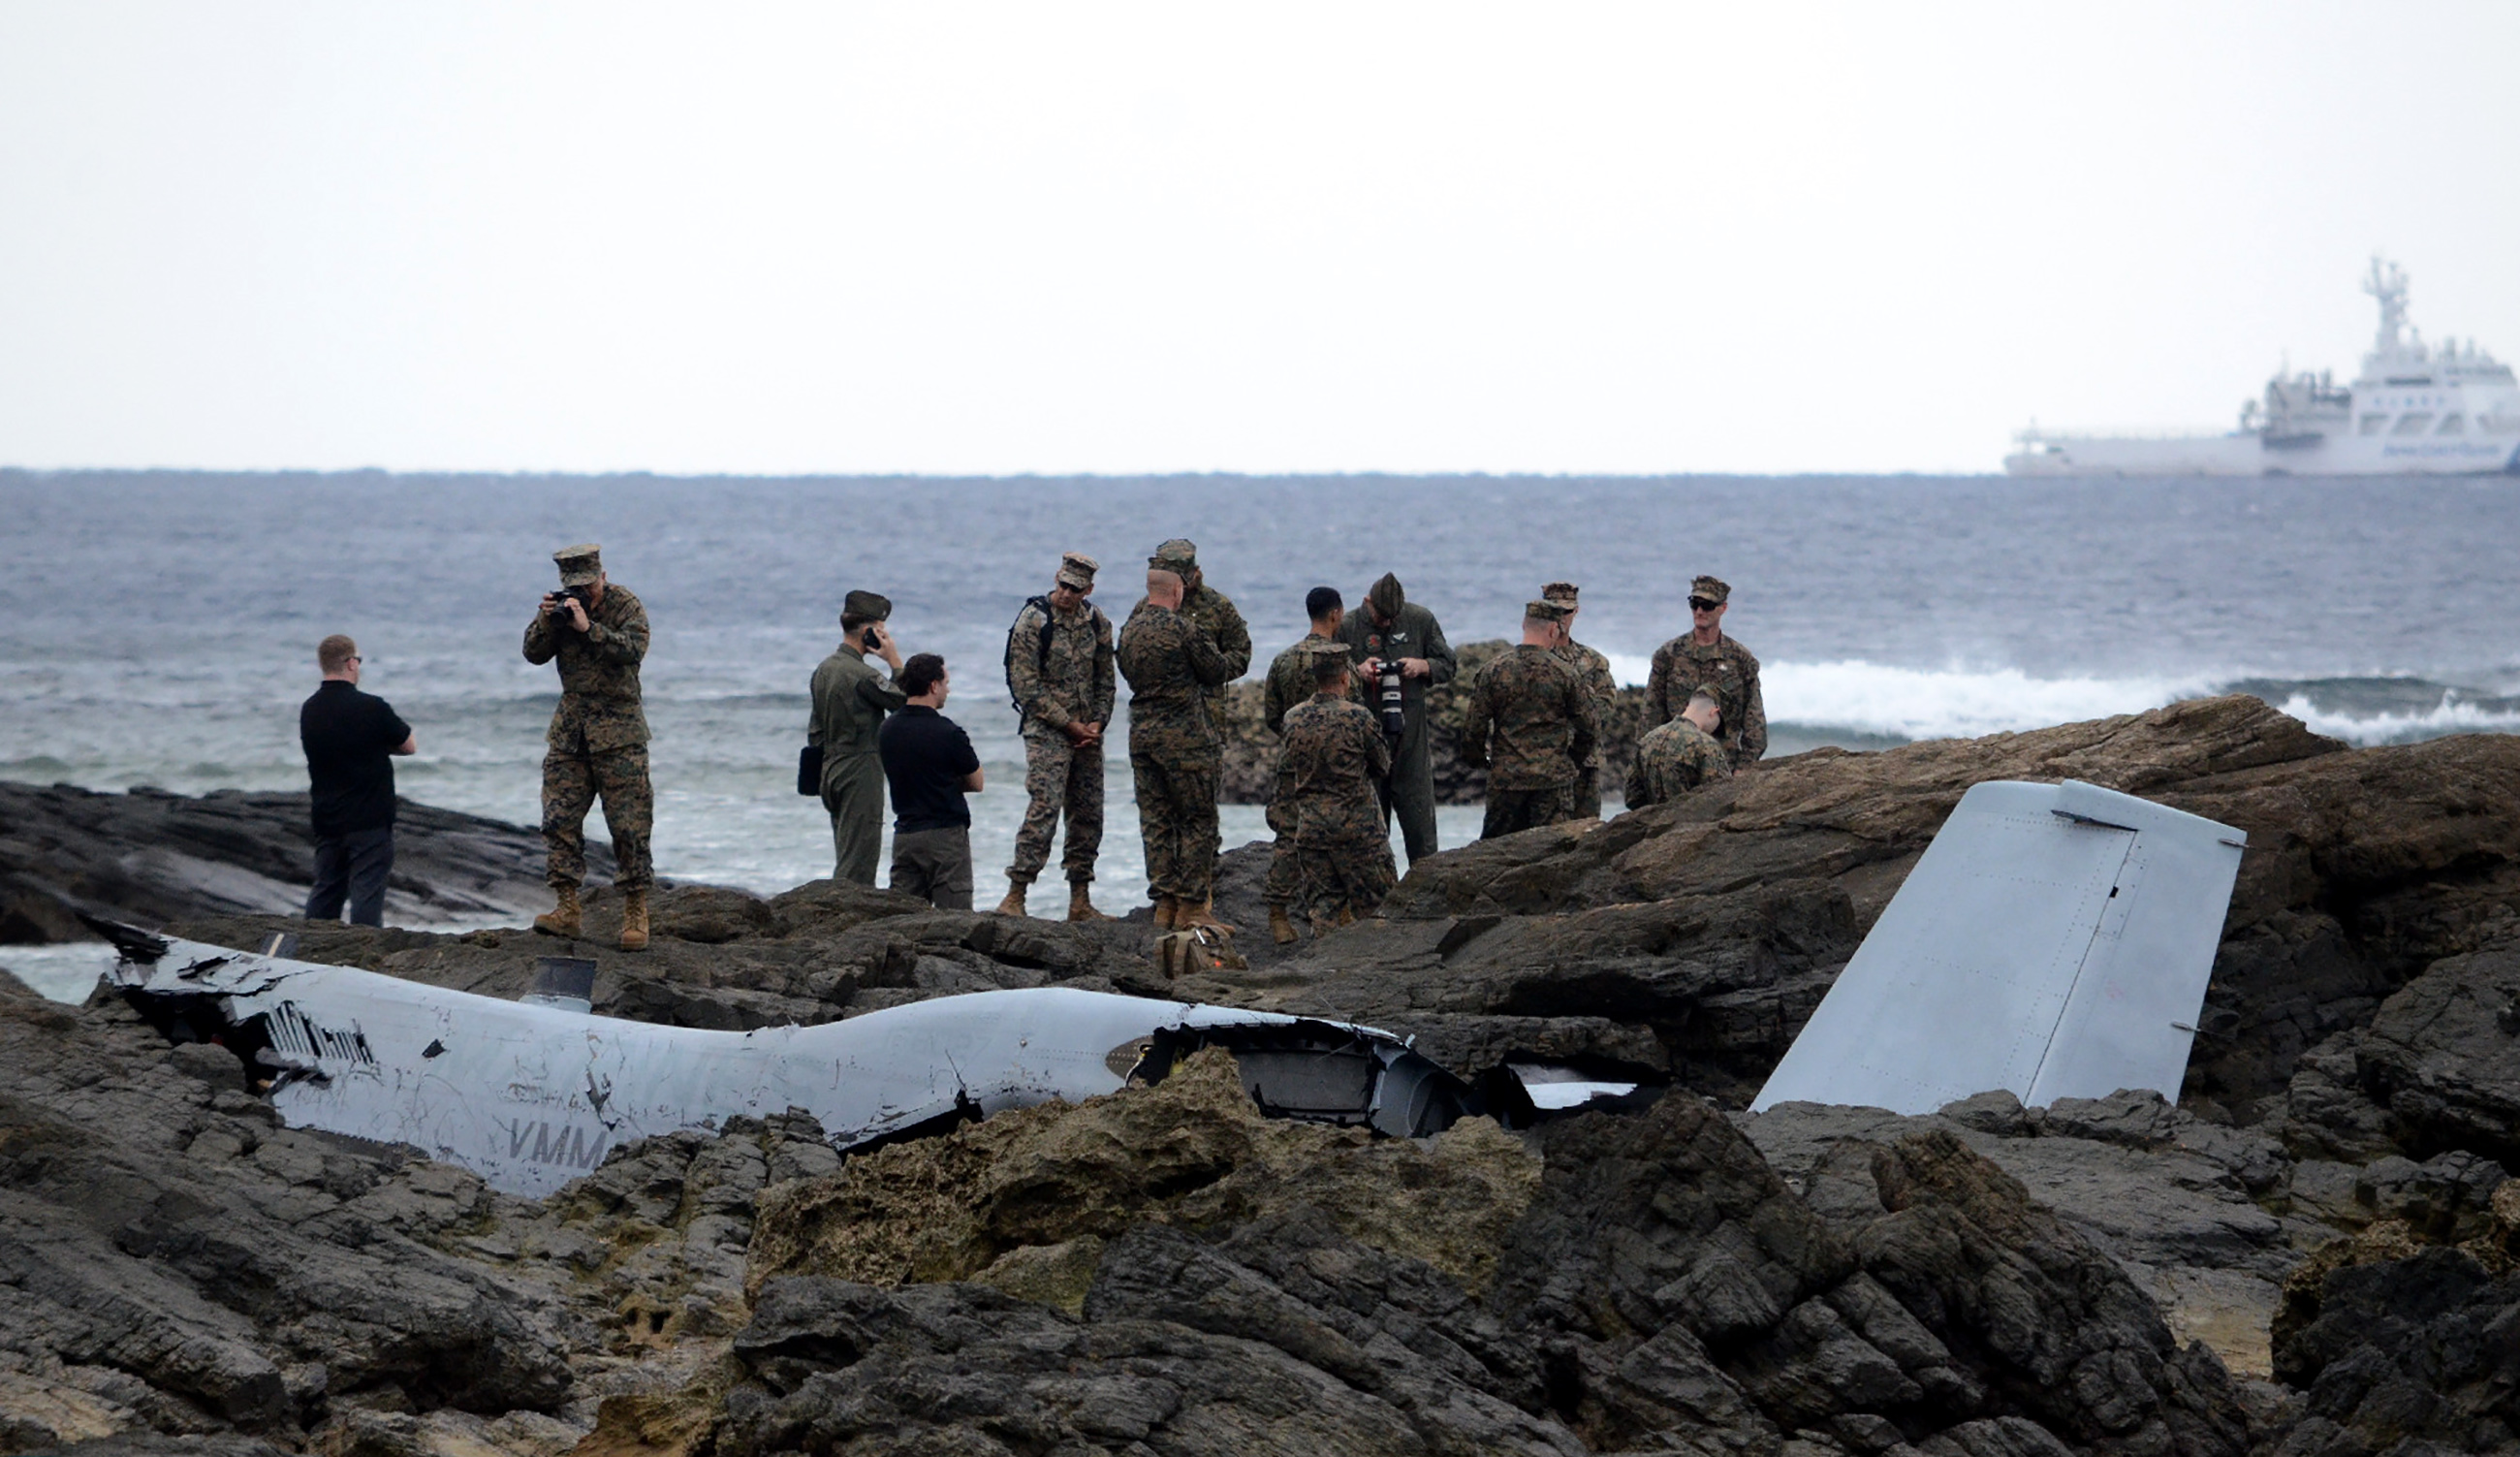 United States grounds Osprey aircraft in Japan after Okinawa crash